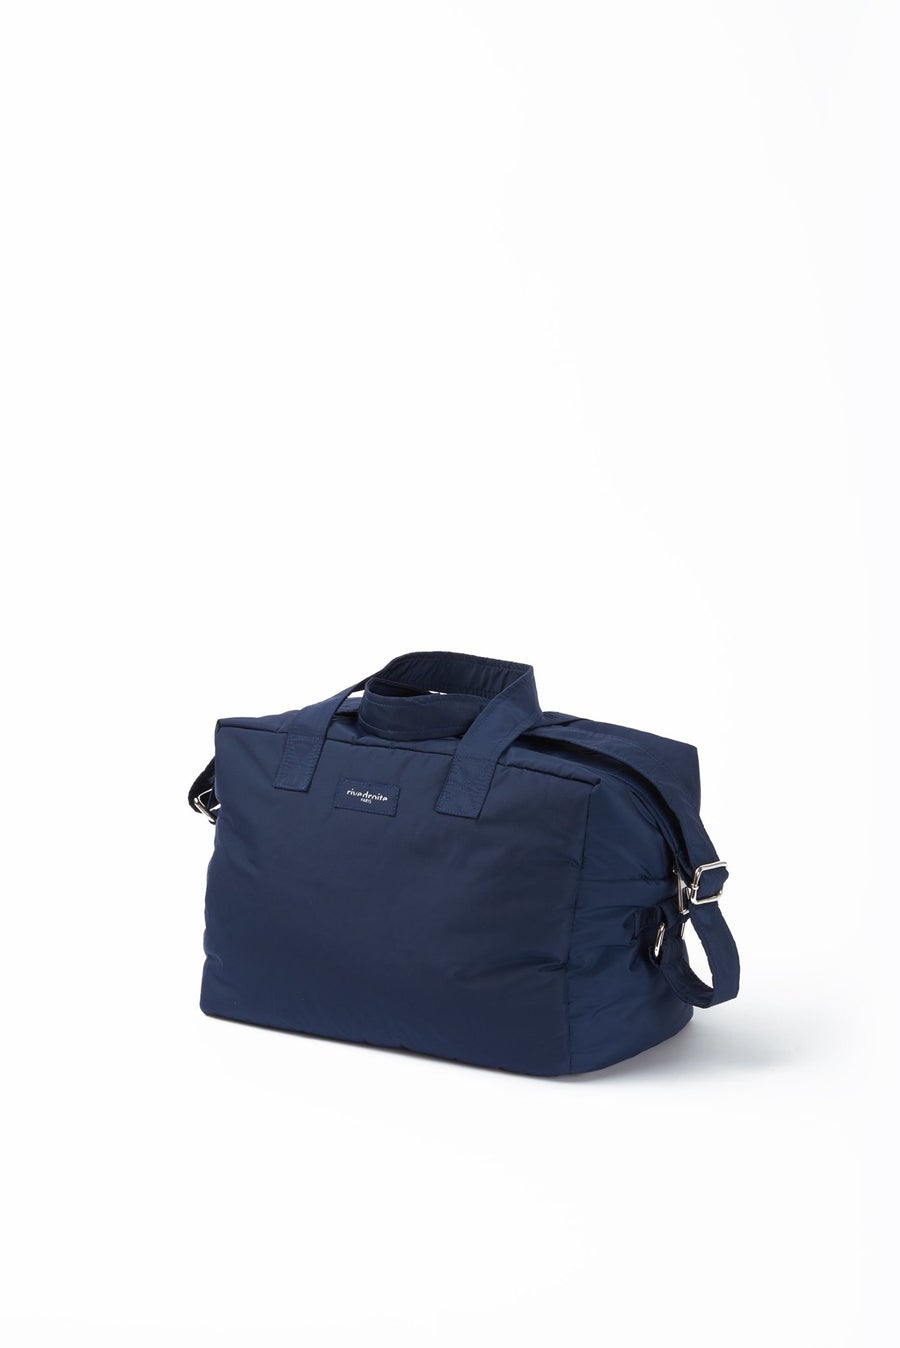 Clery - The City Bag Navy Blue